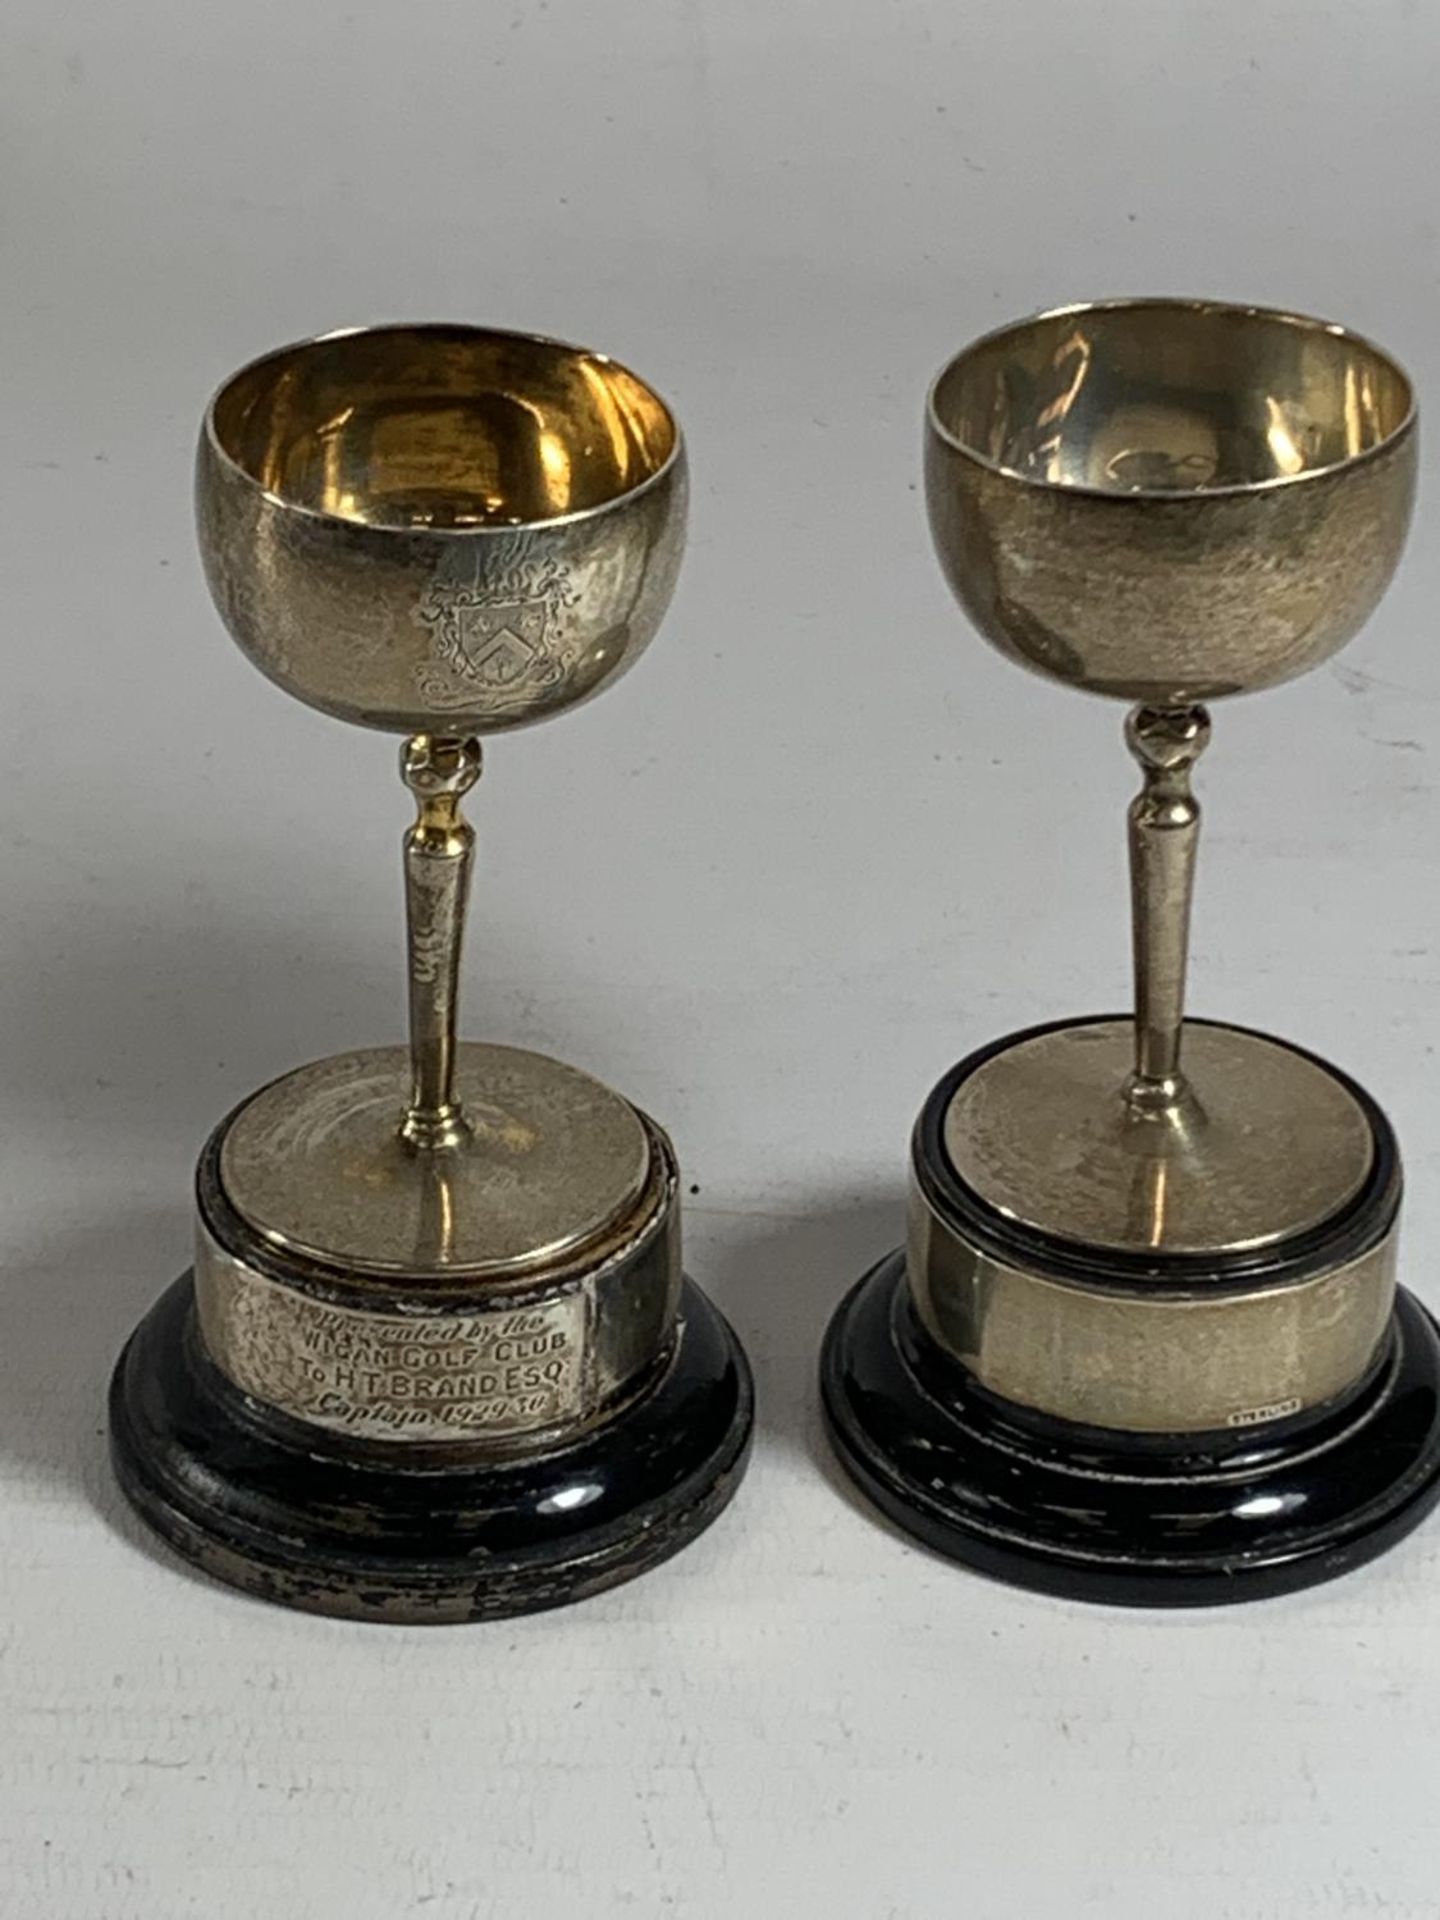 TWO HALLMARKED SILVER TROPHIES ON WOODEN BASES GROSS WEIGHT 160 GRAMS (81 GRAMS WITHOUT THE BASES)